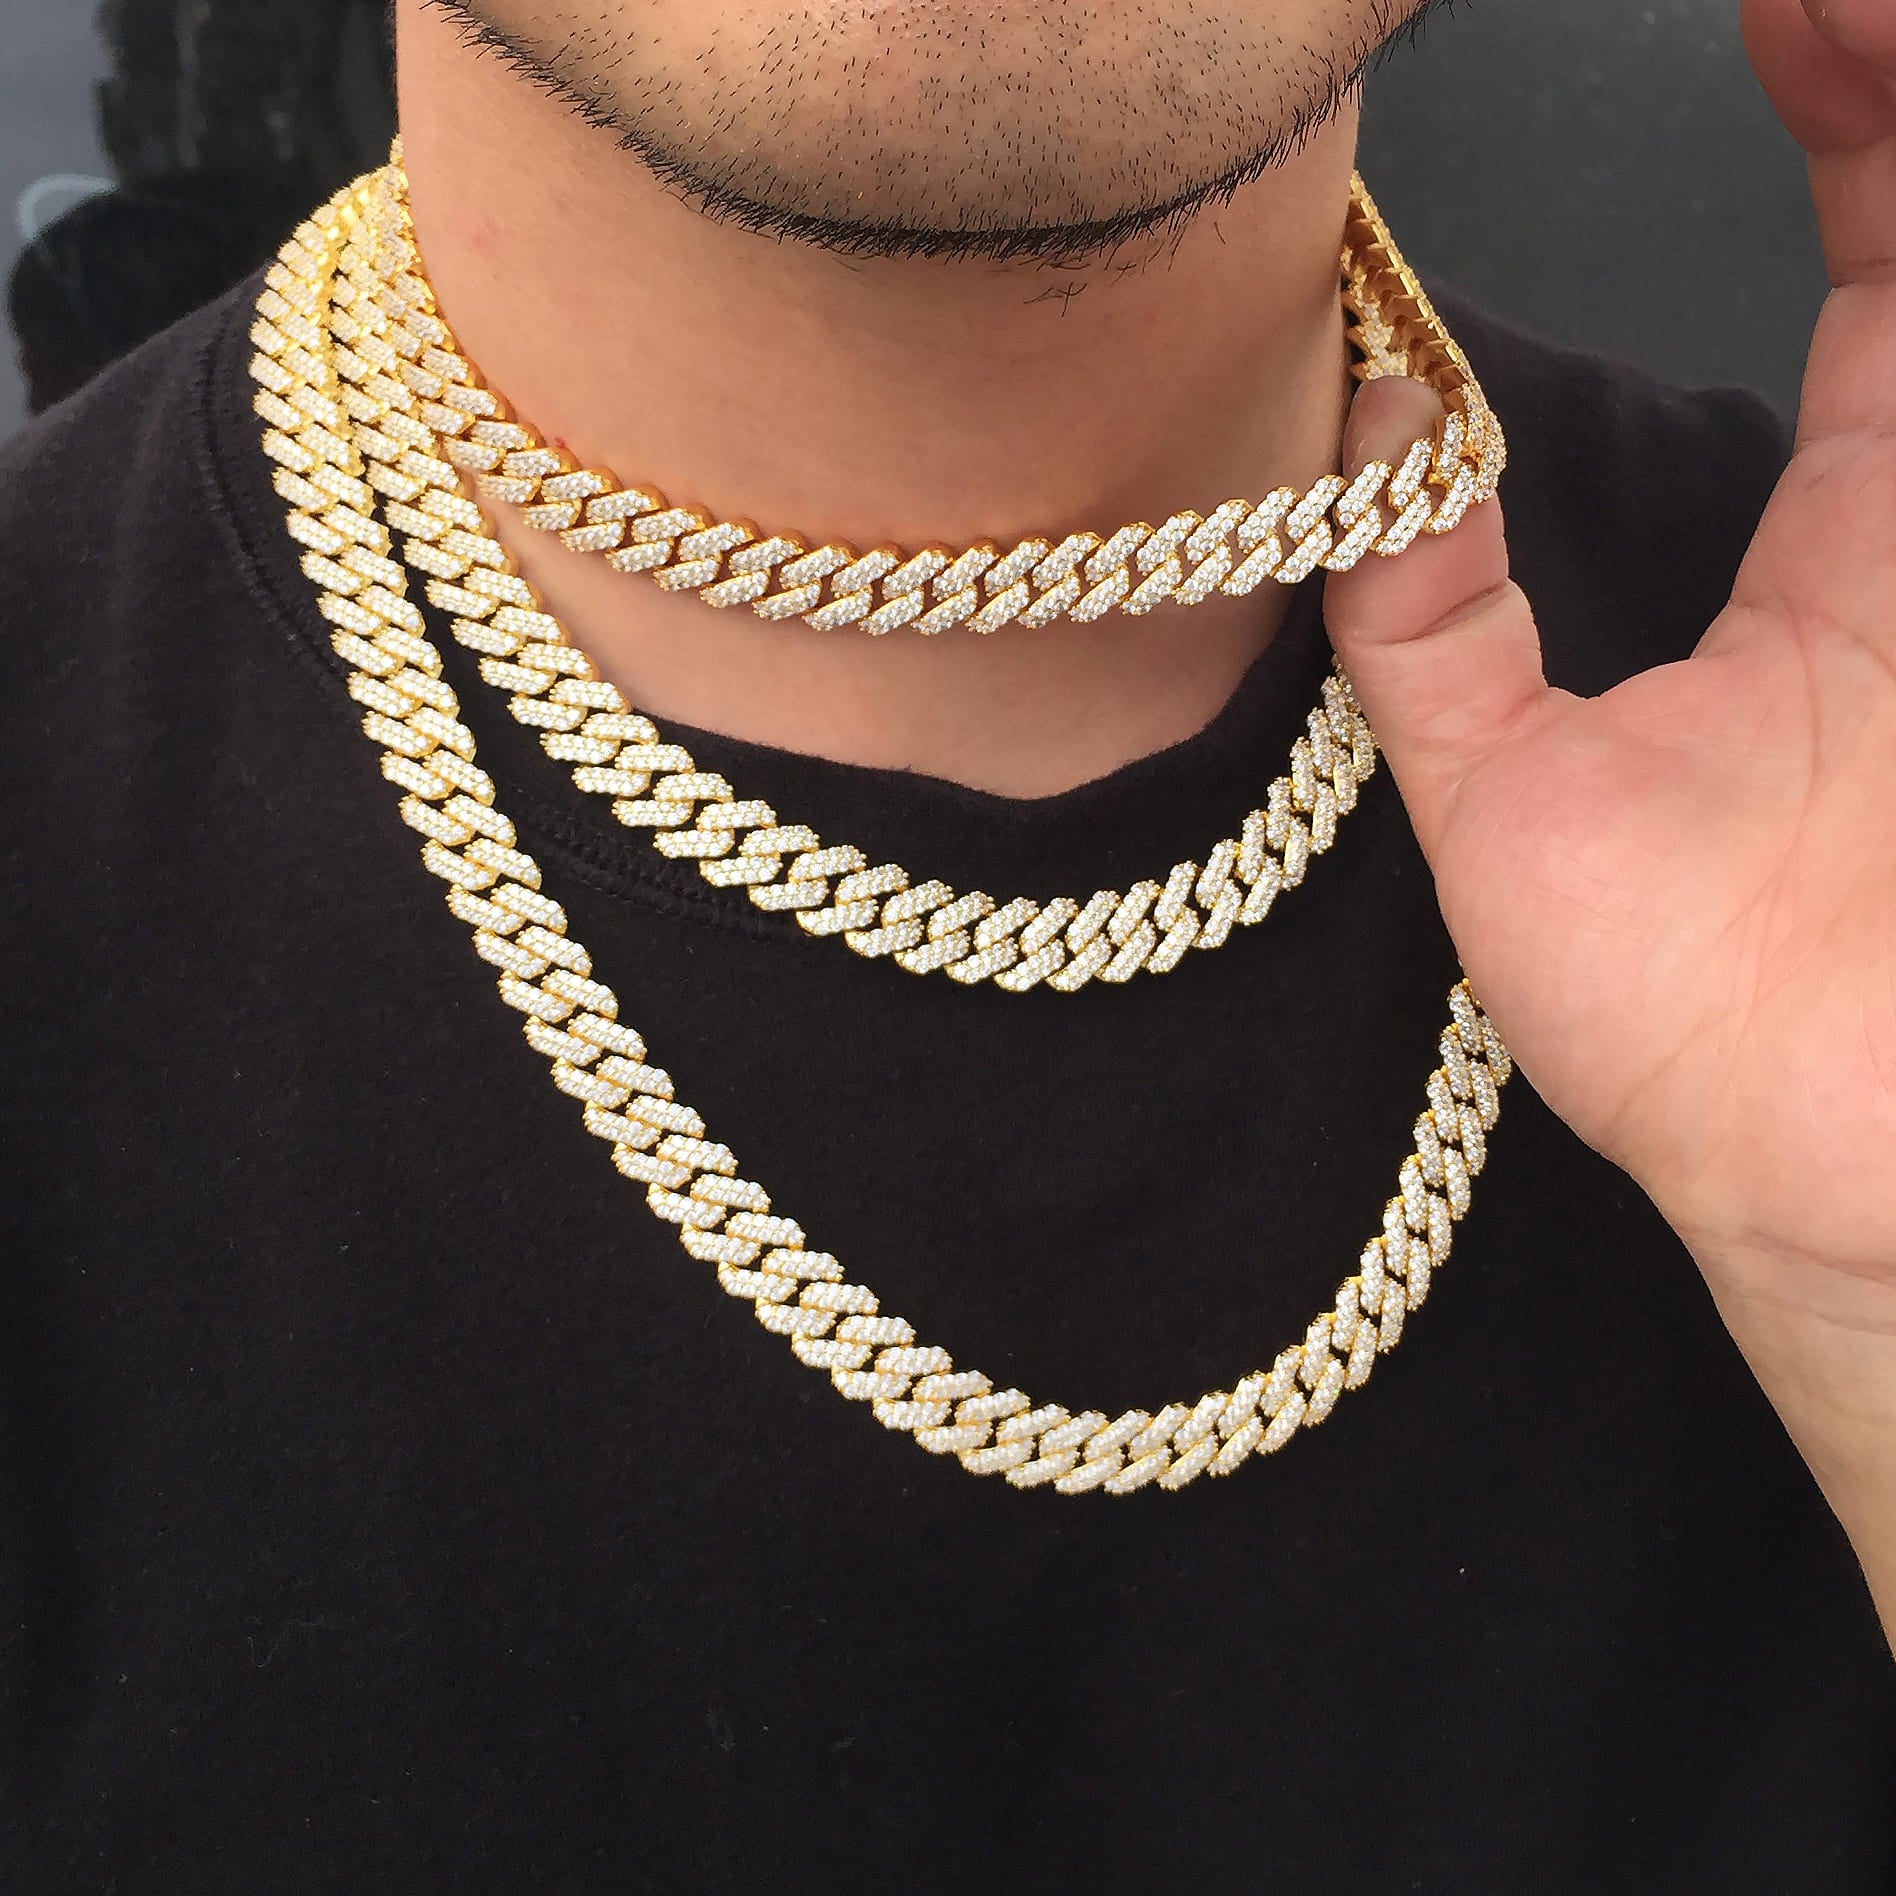 Iced Out Cuban Link Chain